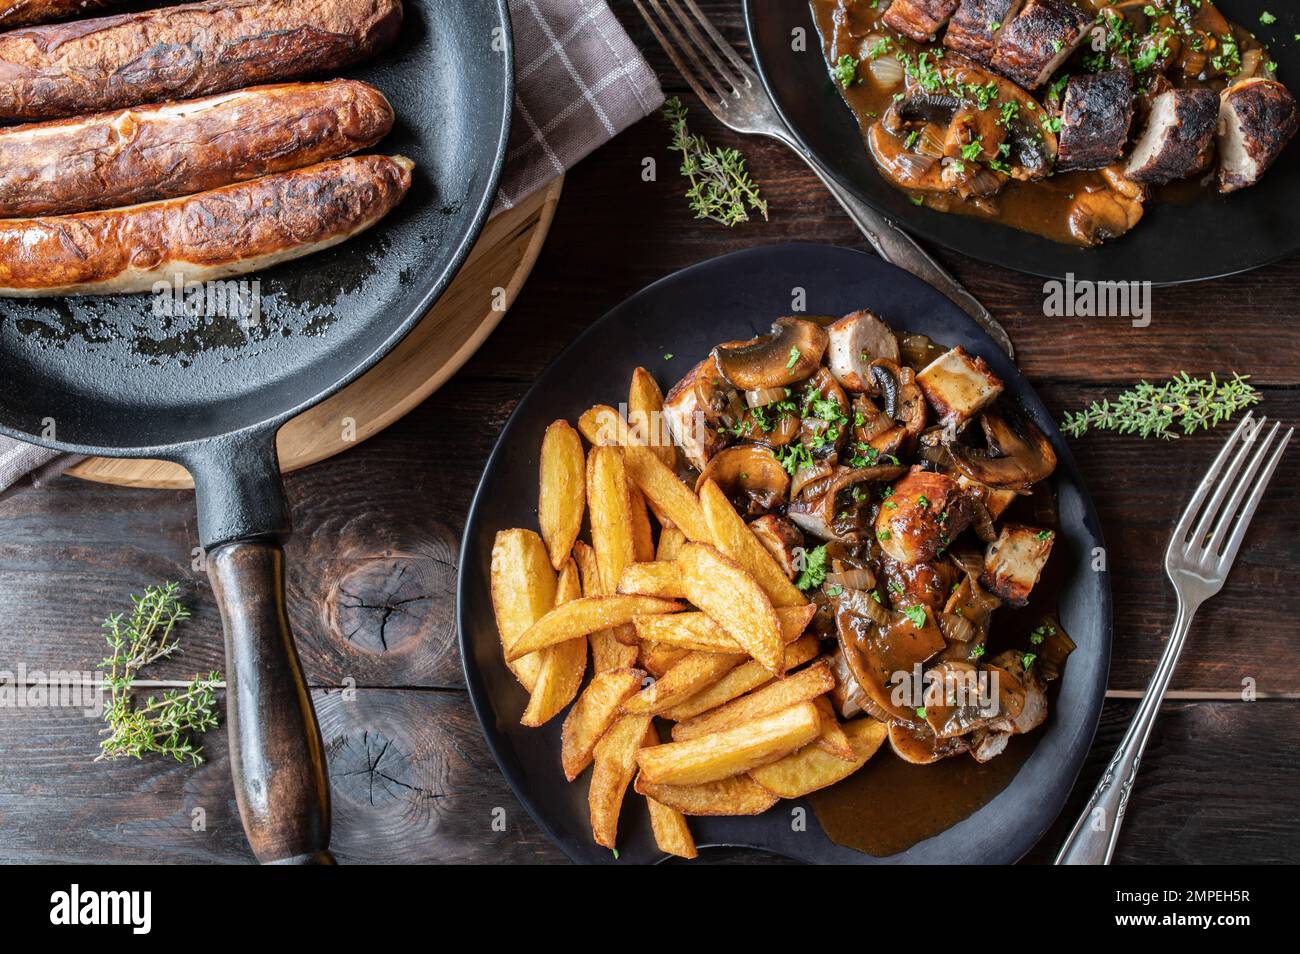 Bratwurst meal with onion, mushroom sauce and french fries on wooden table. Flat lay Stock Photo